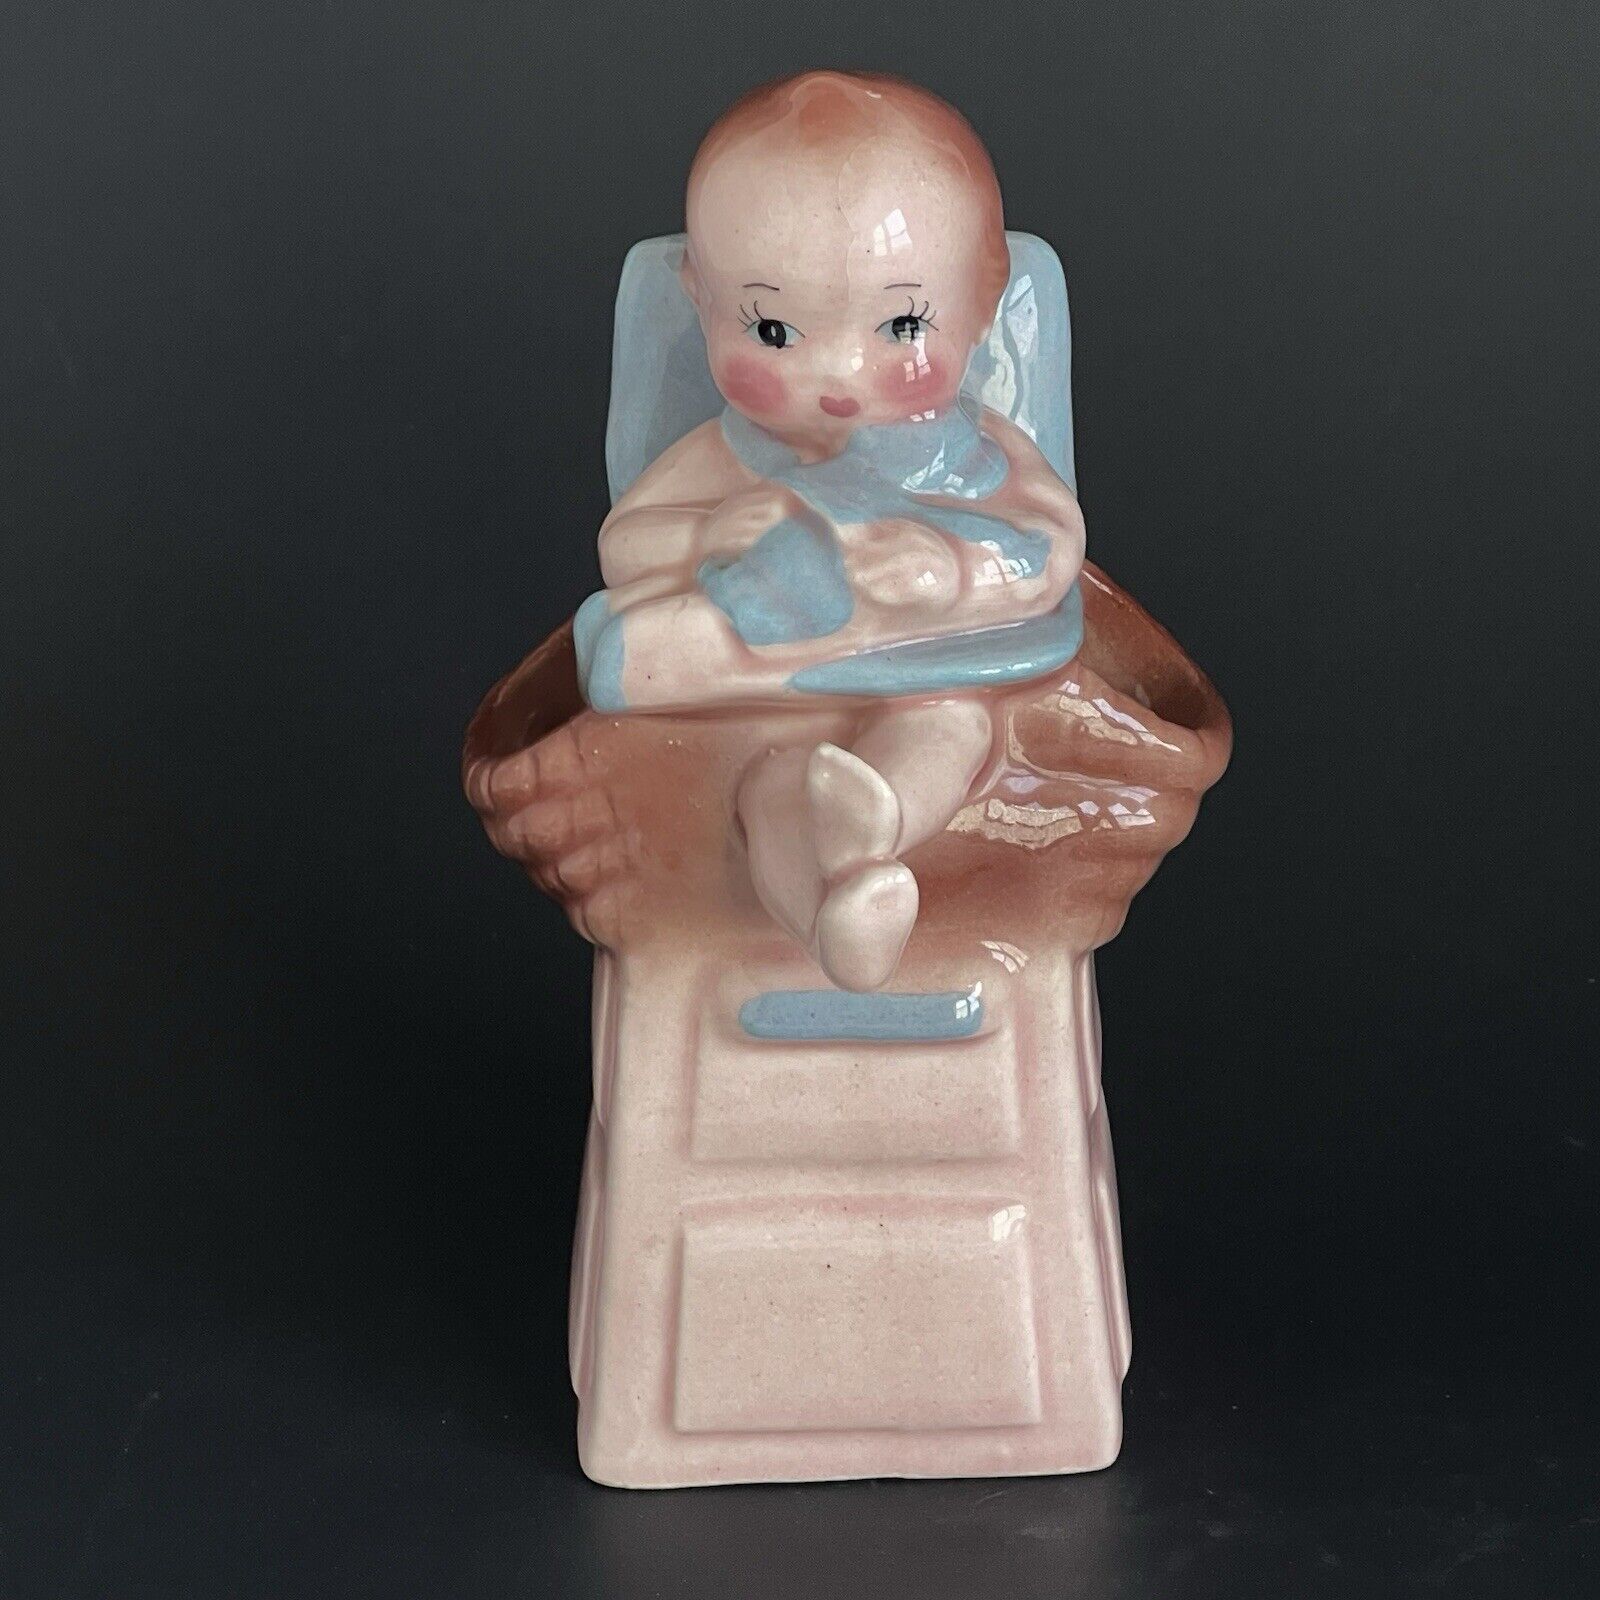 Vintage 1950’s Ceramic Baby in High Chair Planter Vase Nursery 6.5 Inches